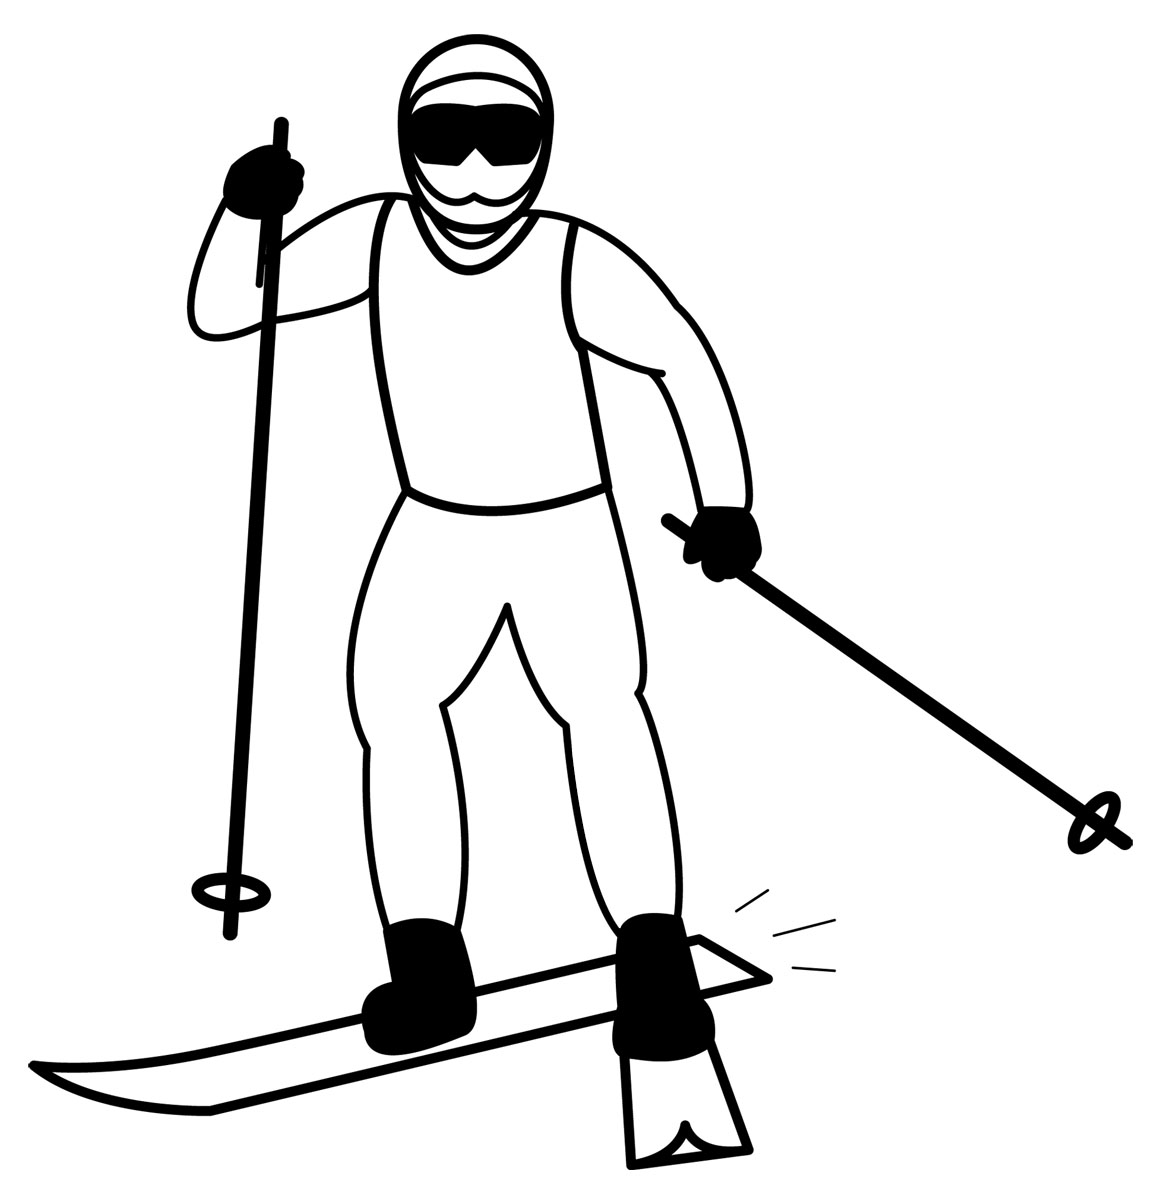 skis clipart black and white